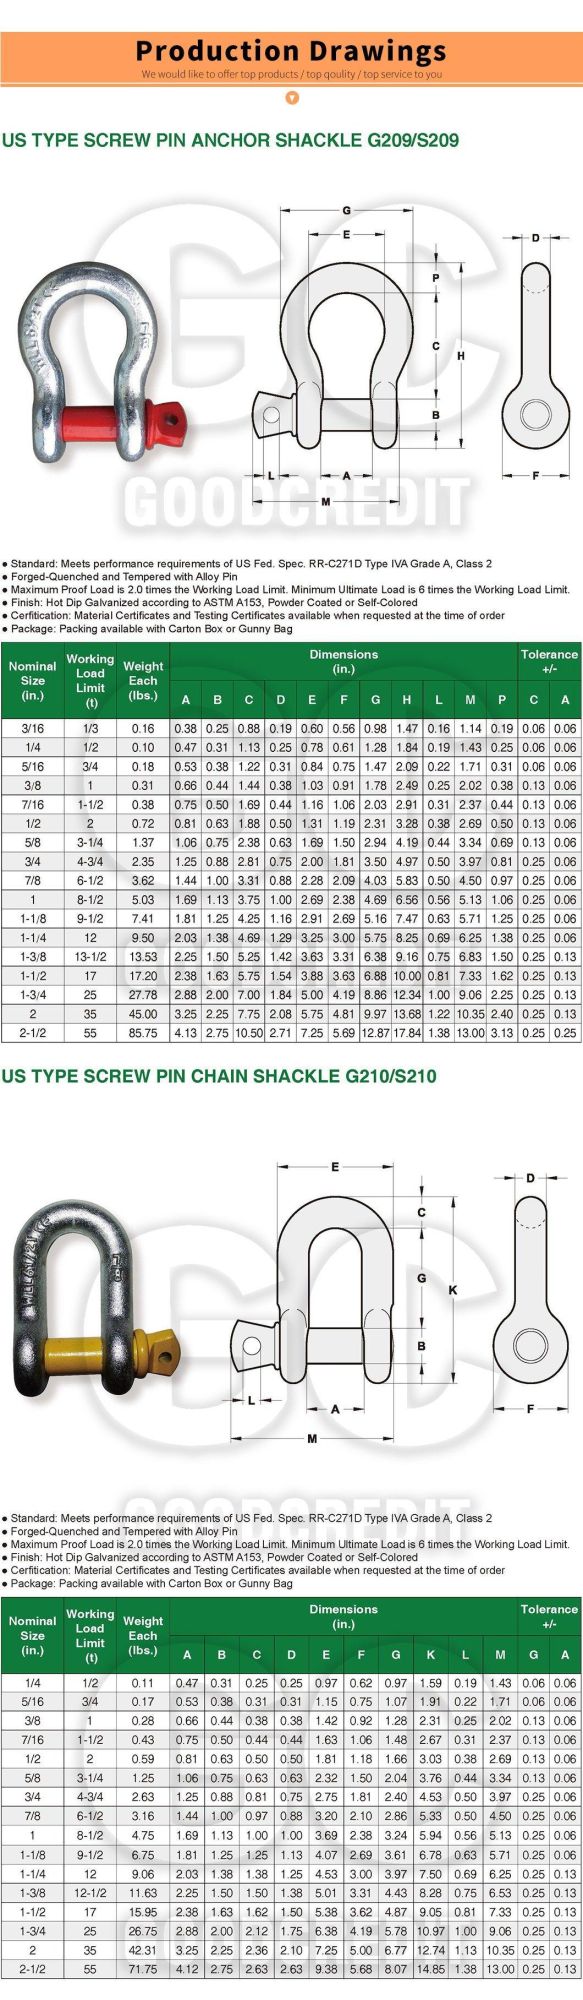 Wholesale Casting Long D Shackle Captive Pin Shackle Type for Boat/Yacht/Ship Price USA Boat Accessories